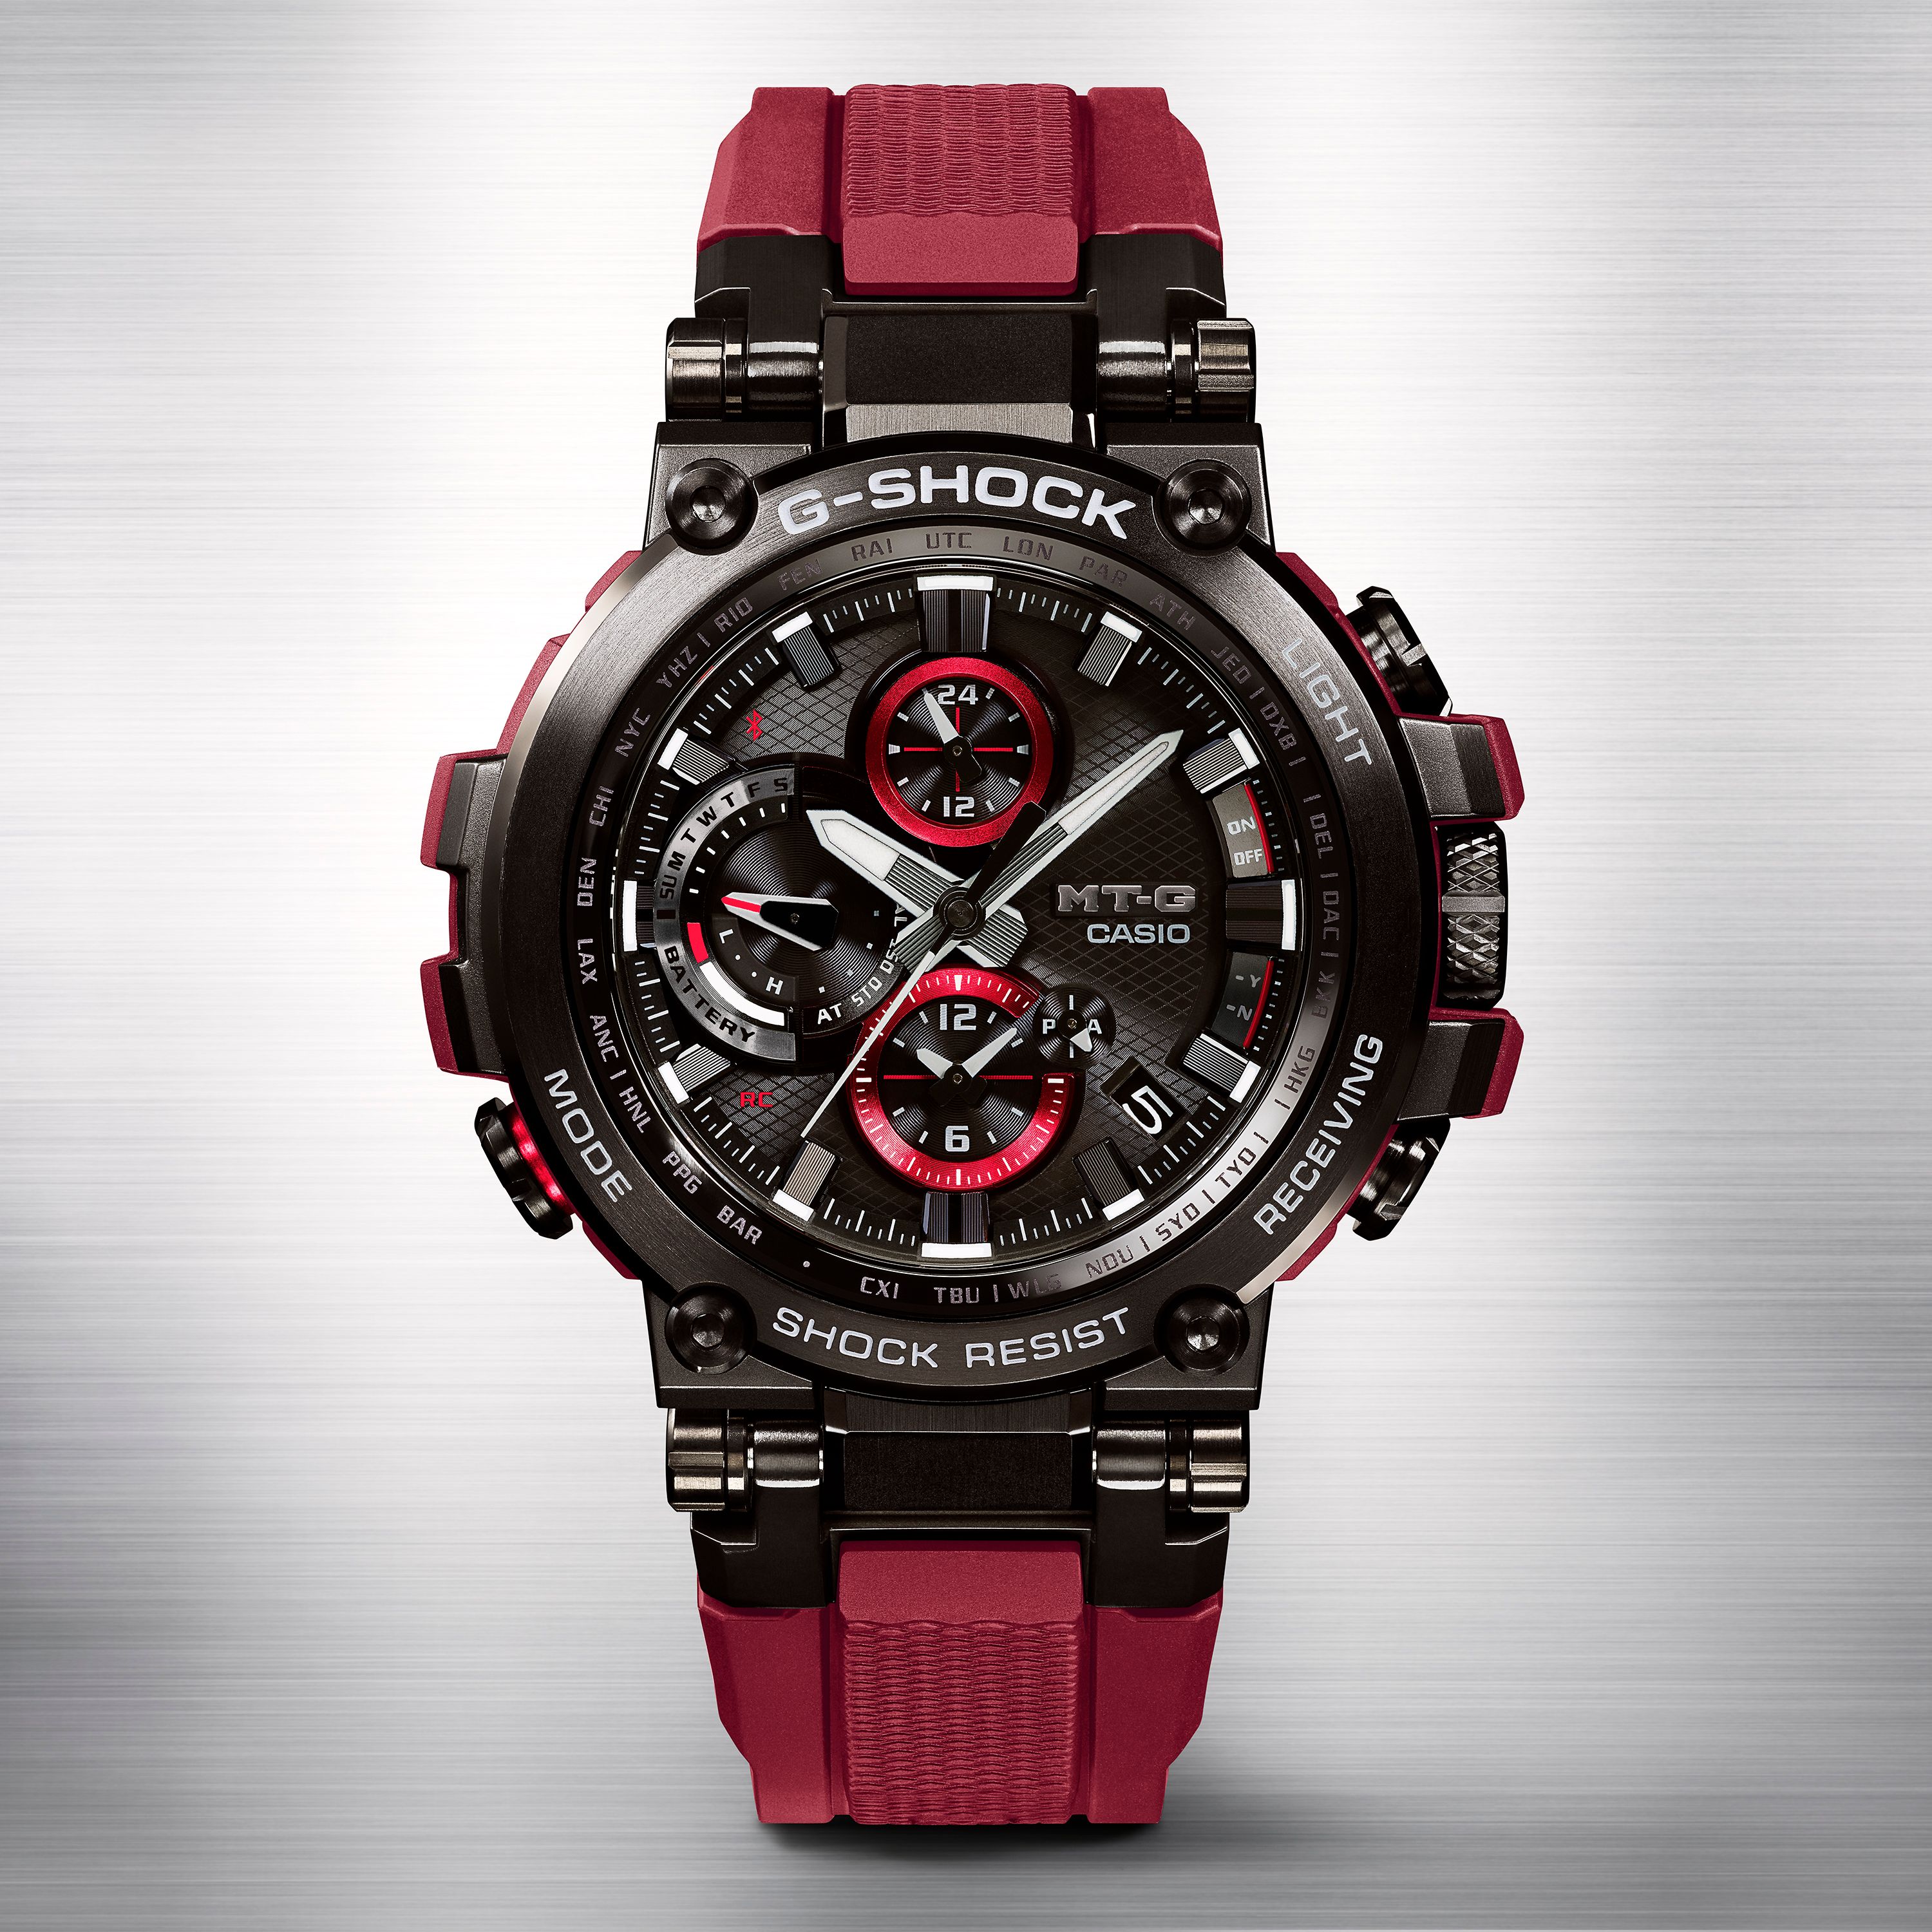 Casio G Shock Introduces A New Connected Mt G In Vibrant Red Colorway Gshock News